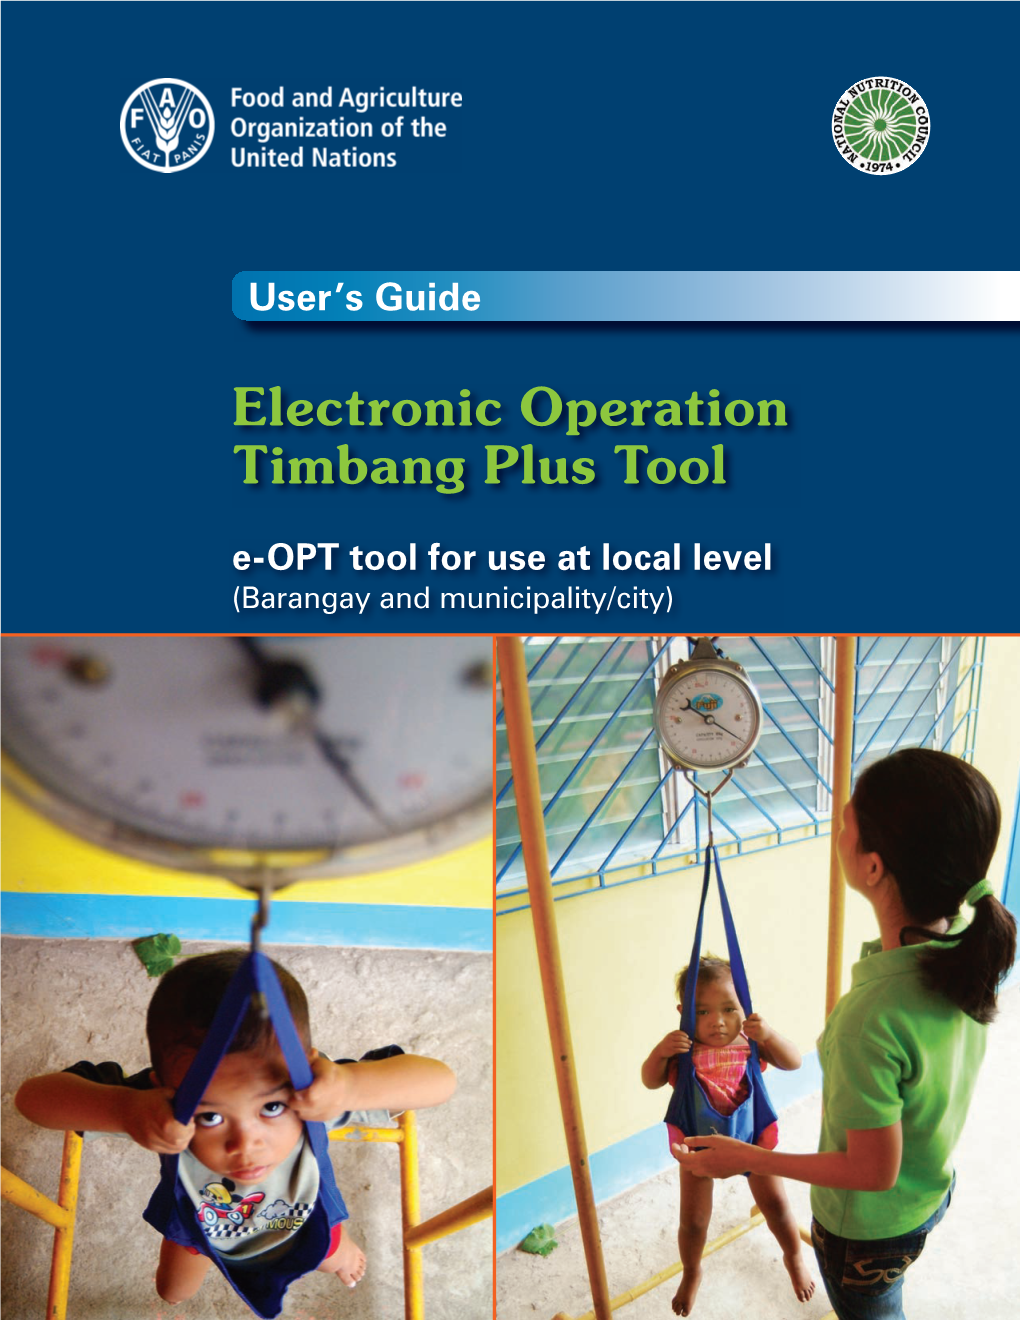 Electronic Operation Timbang Plus Tool E-OPT Tool for Use at Local Level (Barangay and Municipality/City)